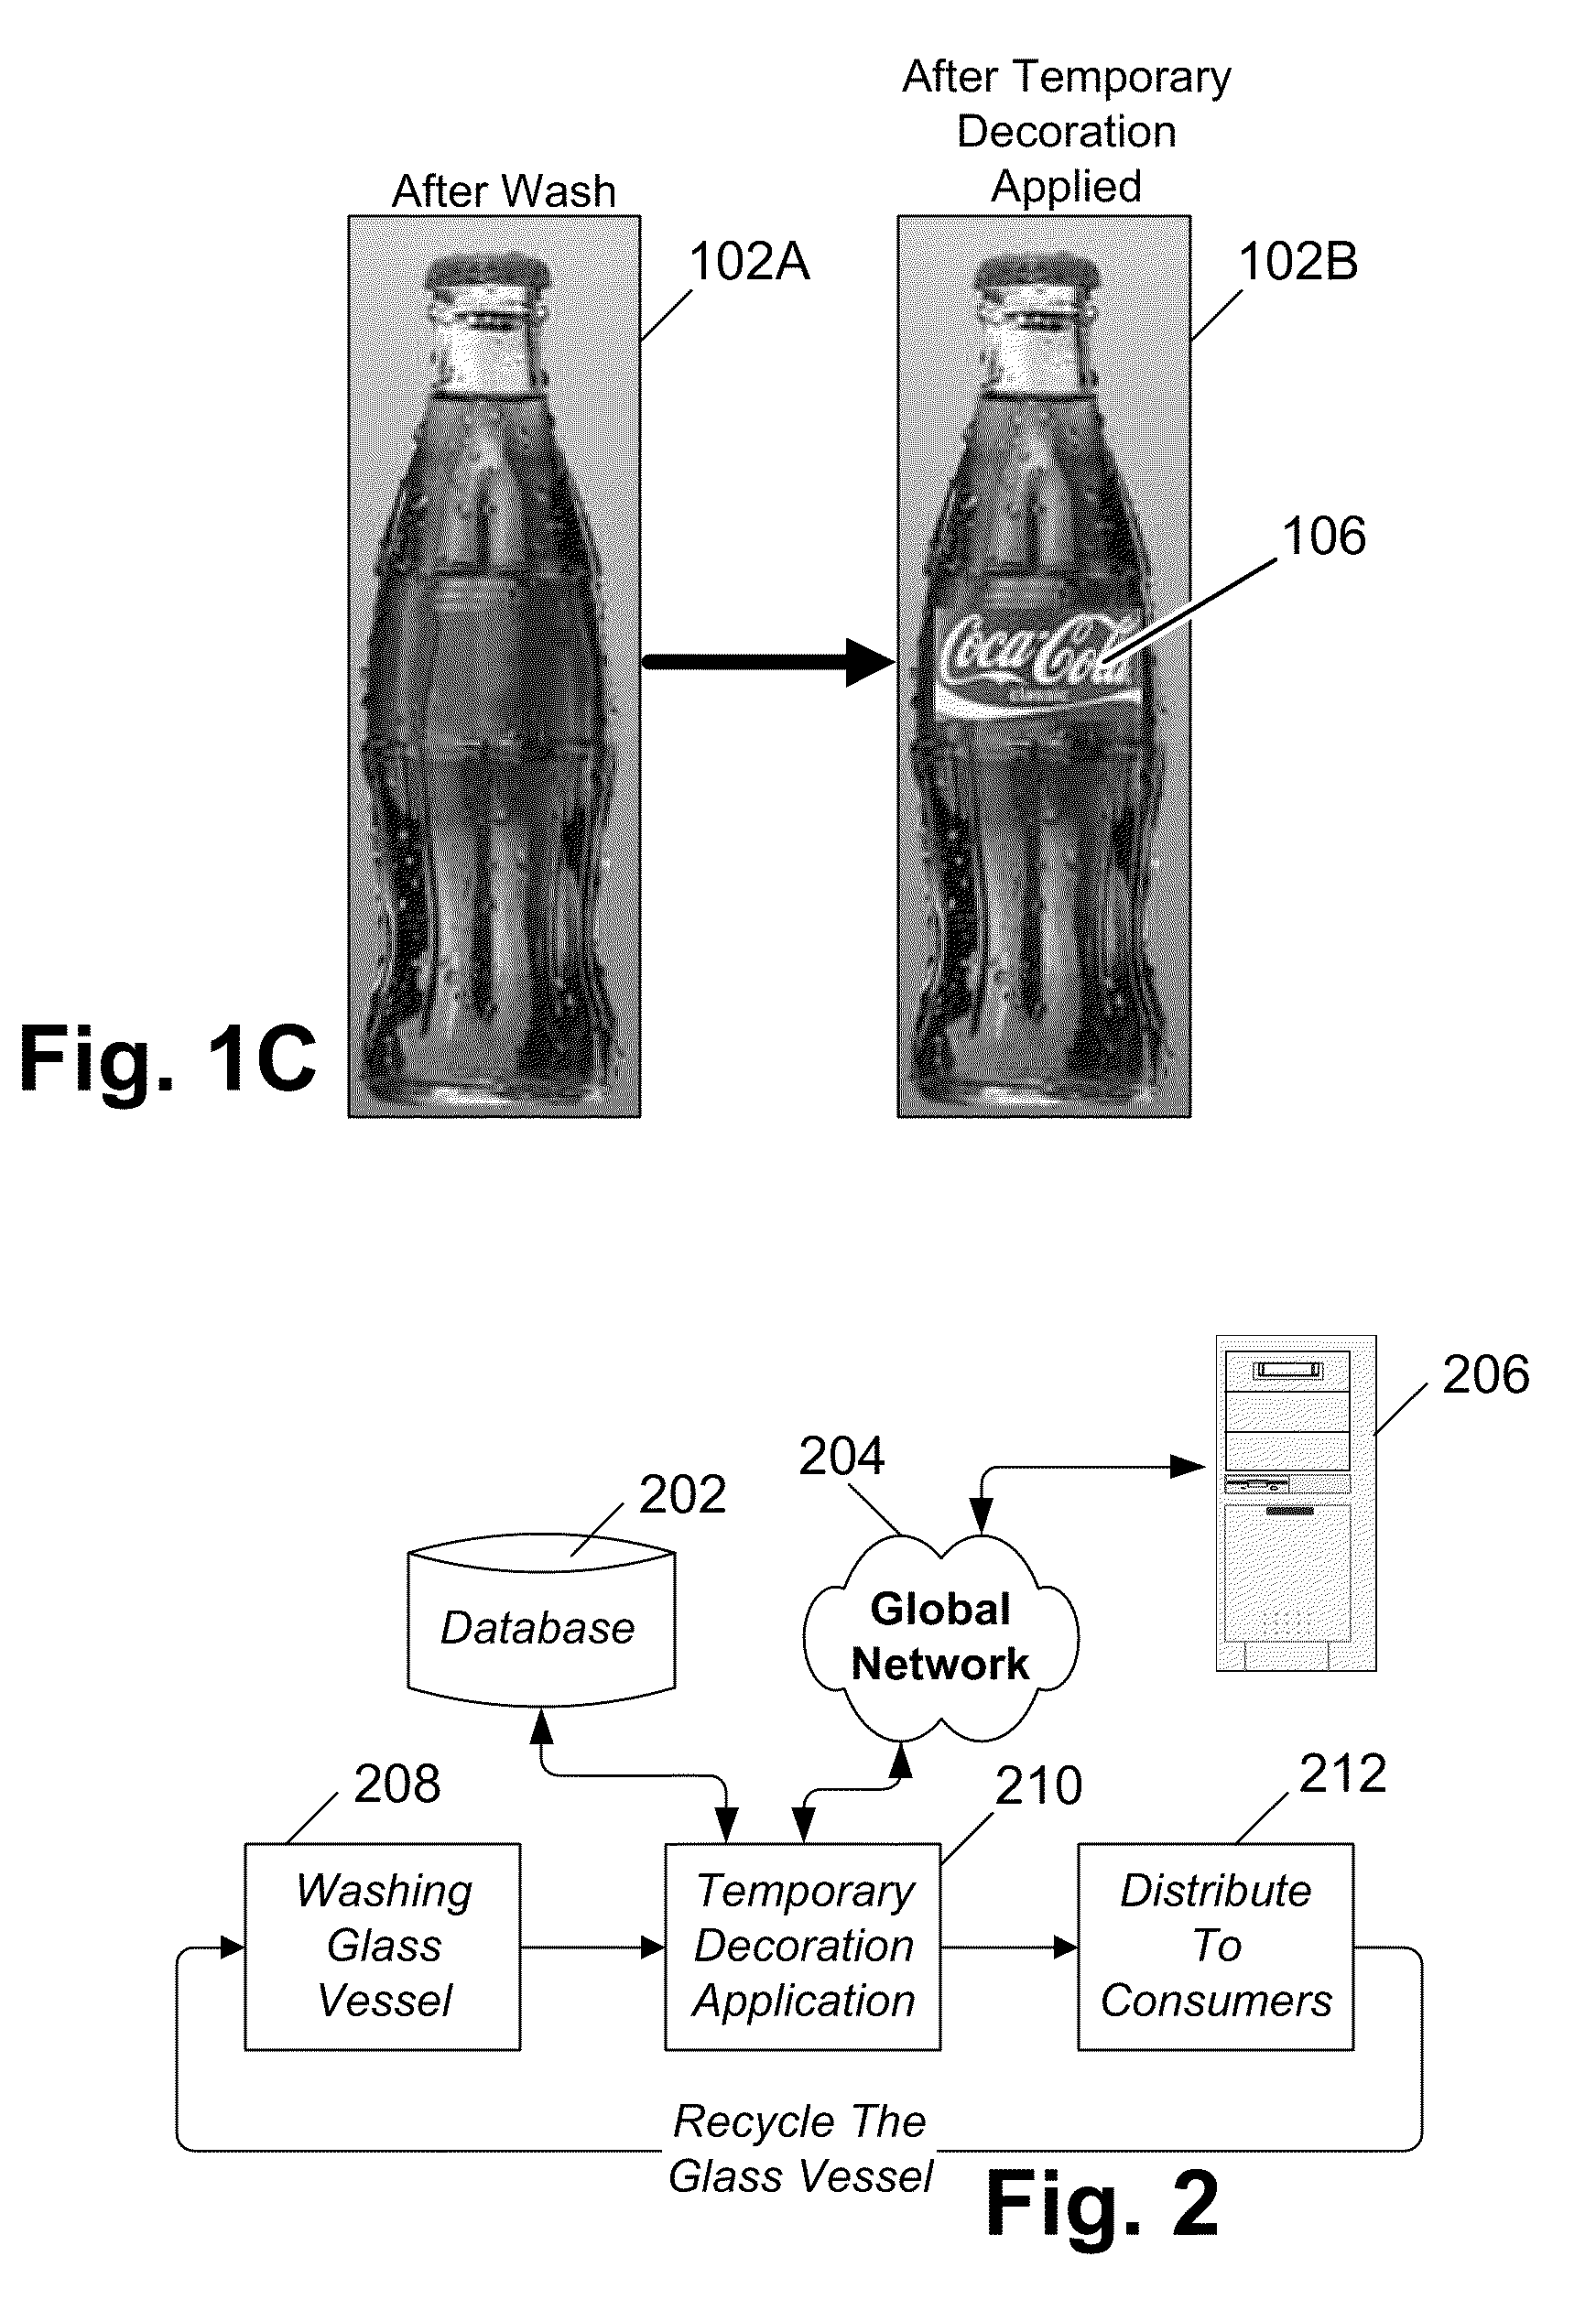 Method of using temporary decoration to mass customize refillable glass vessels